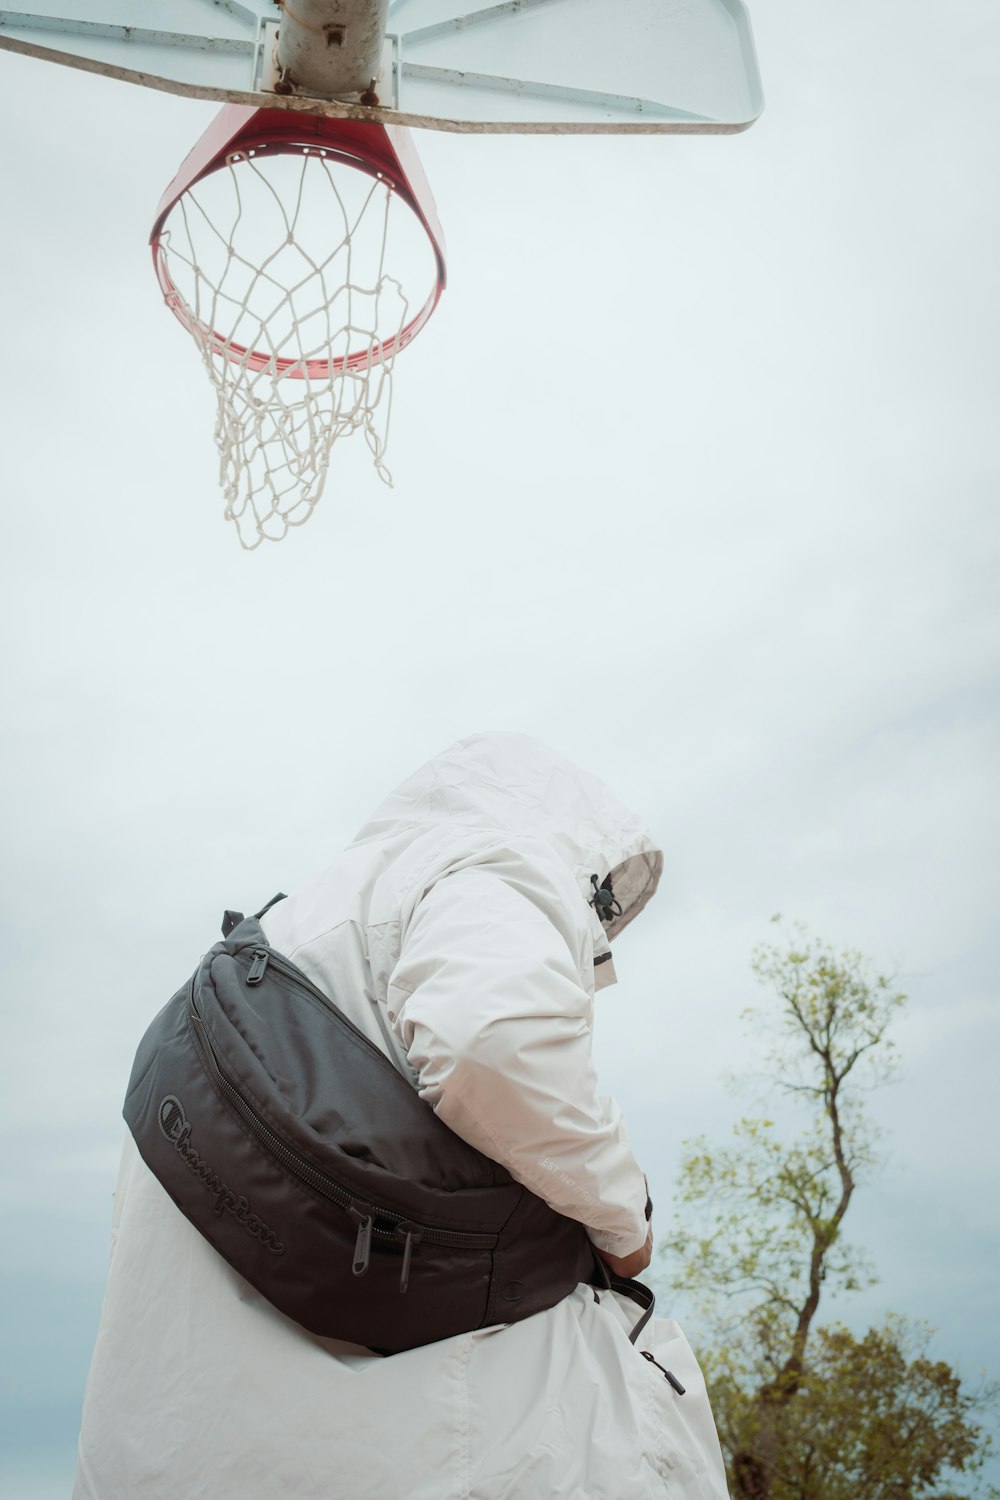 a person in a white suit is playing basketball